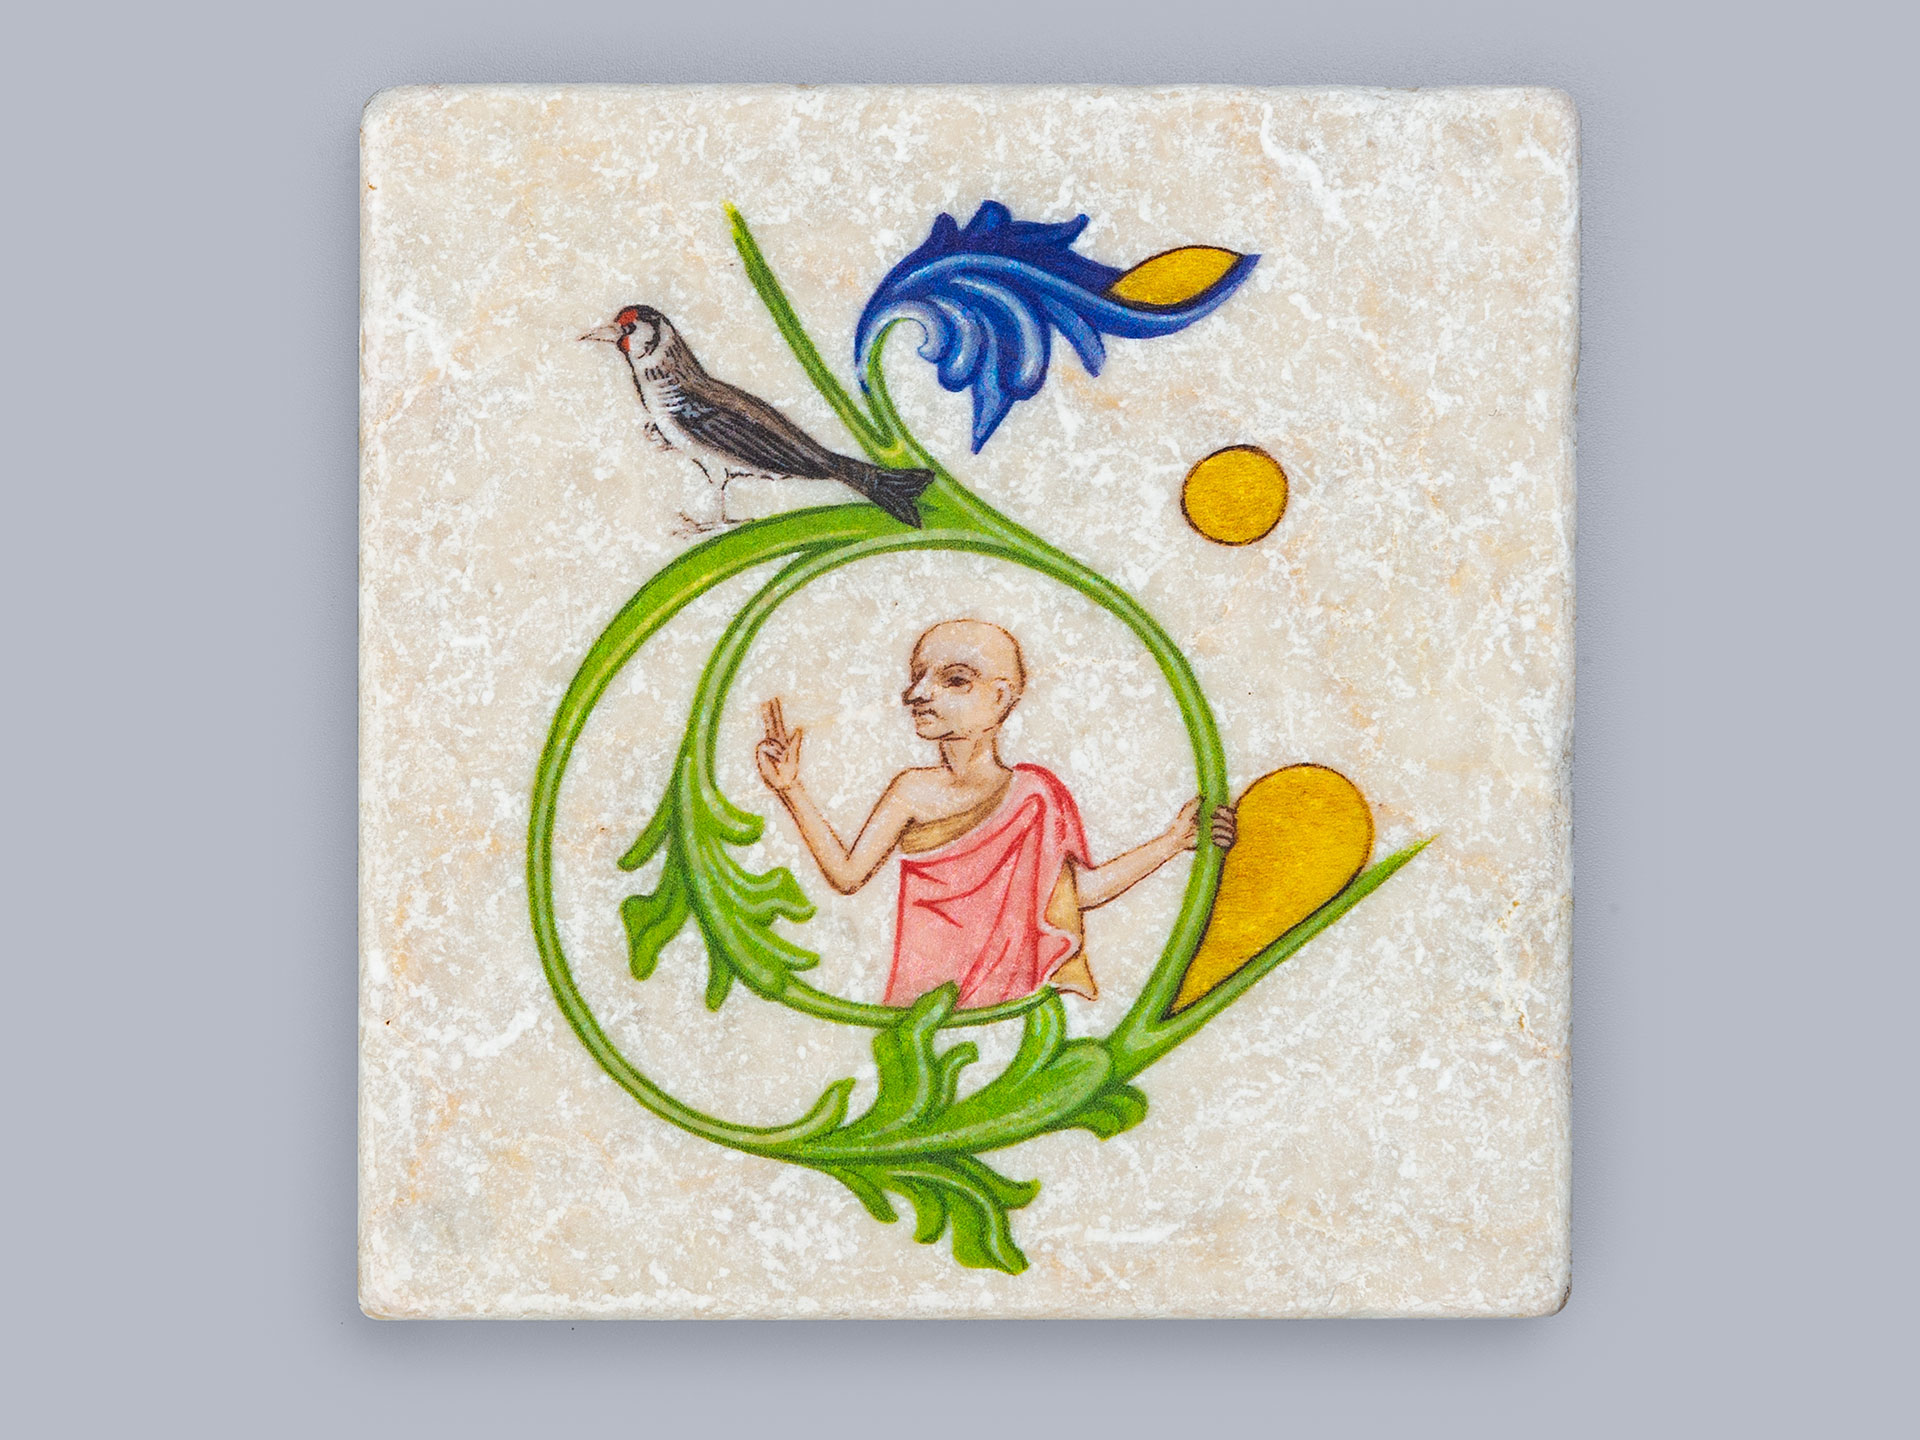  Marble tiles with miniature paintings